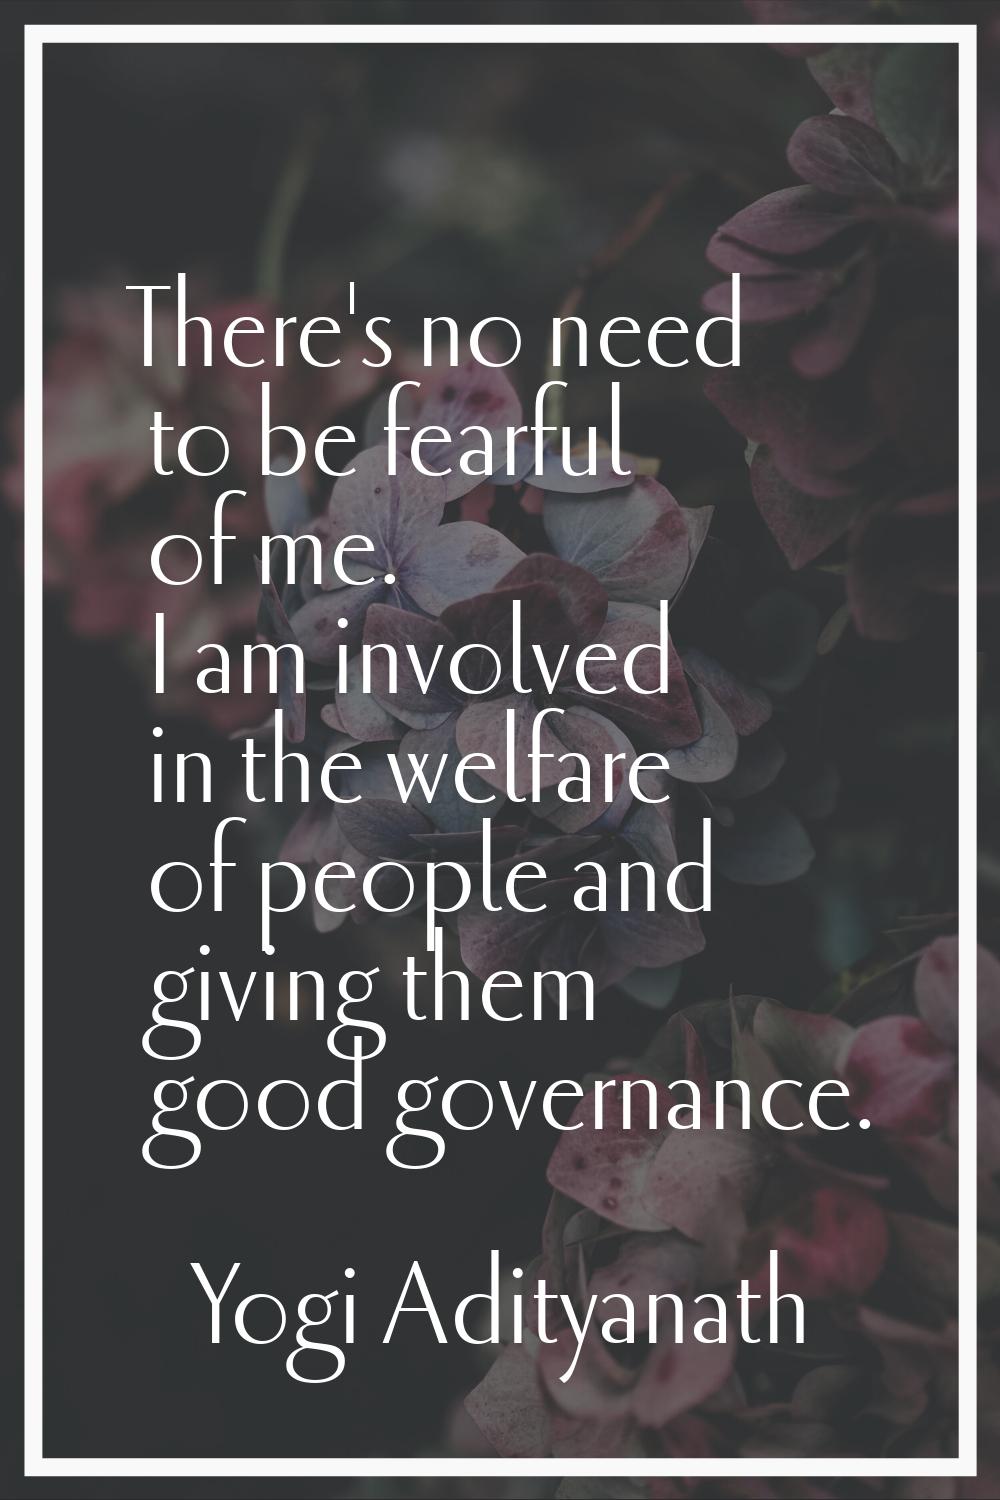 There's no need to be fearful of me. I am involved in the welfare of people and giving them good go